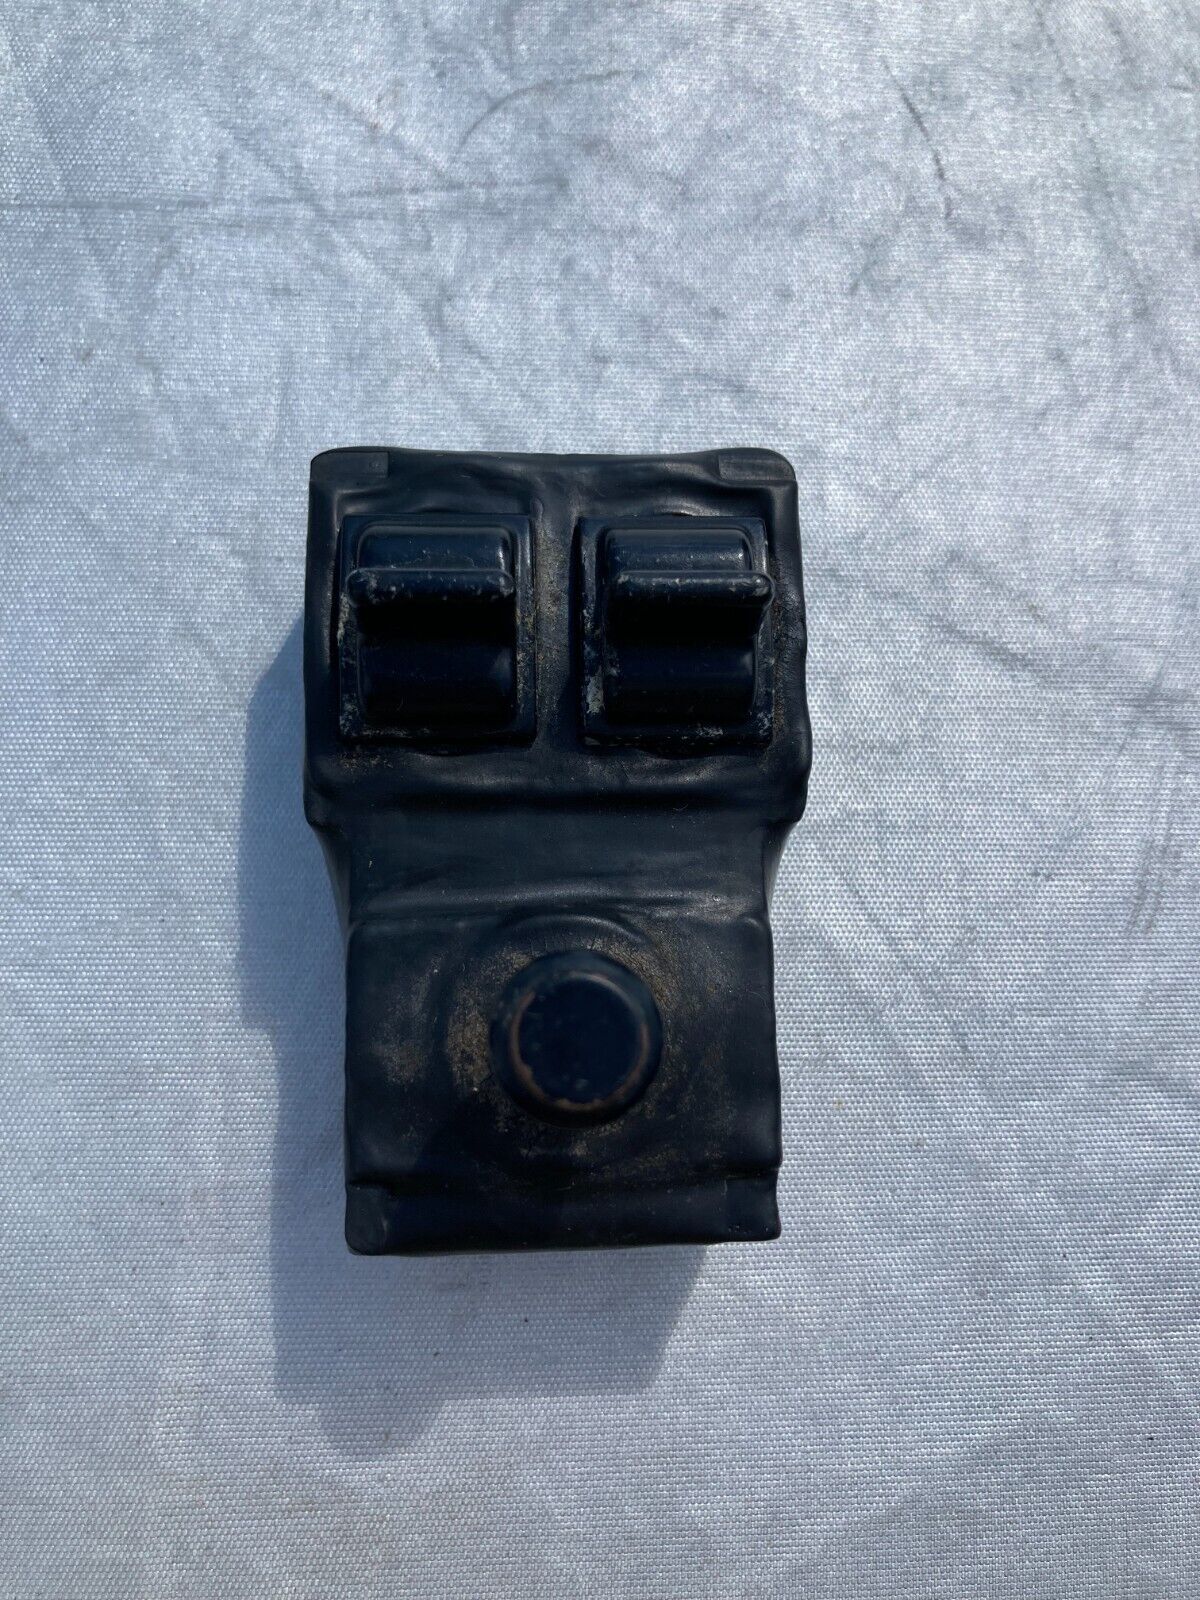 1985-1988 Ford Thunderbird Turbo Coupe Power Seat Switch Control Assy. OEM